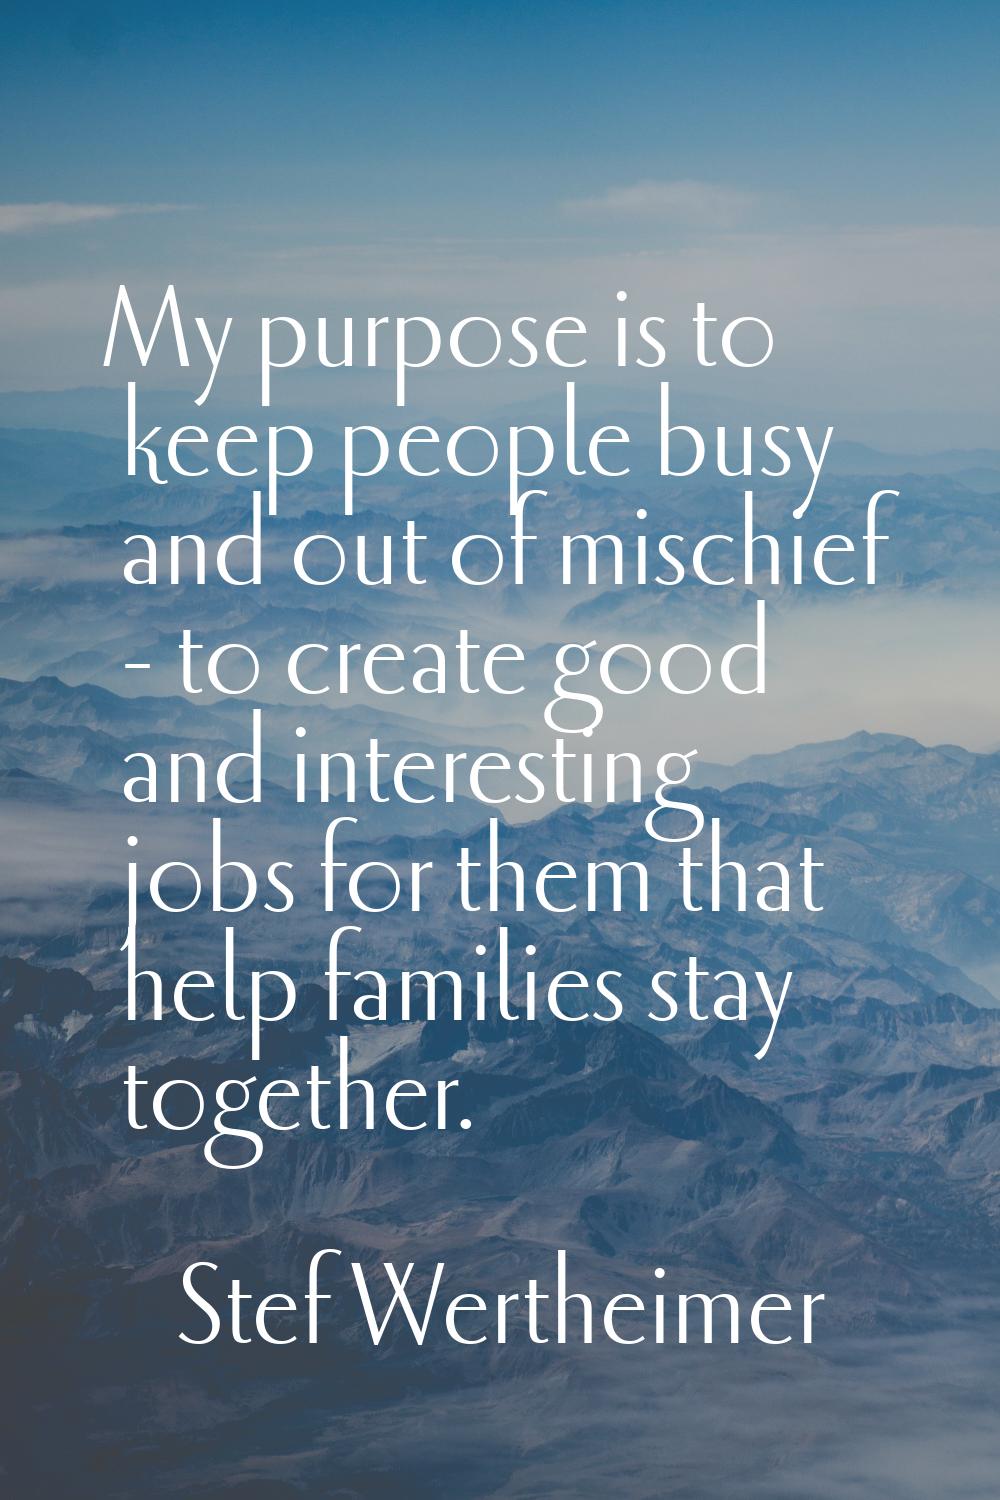 My purpose is to keep people busy and out of mischief - to create good and interesting jobs for the